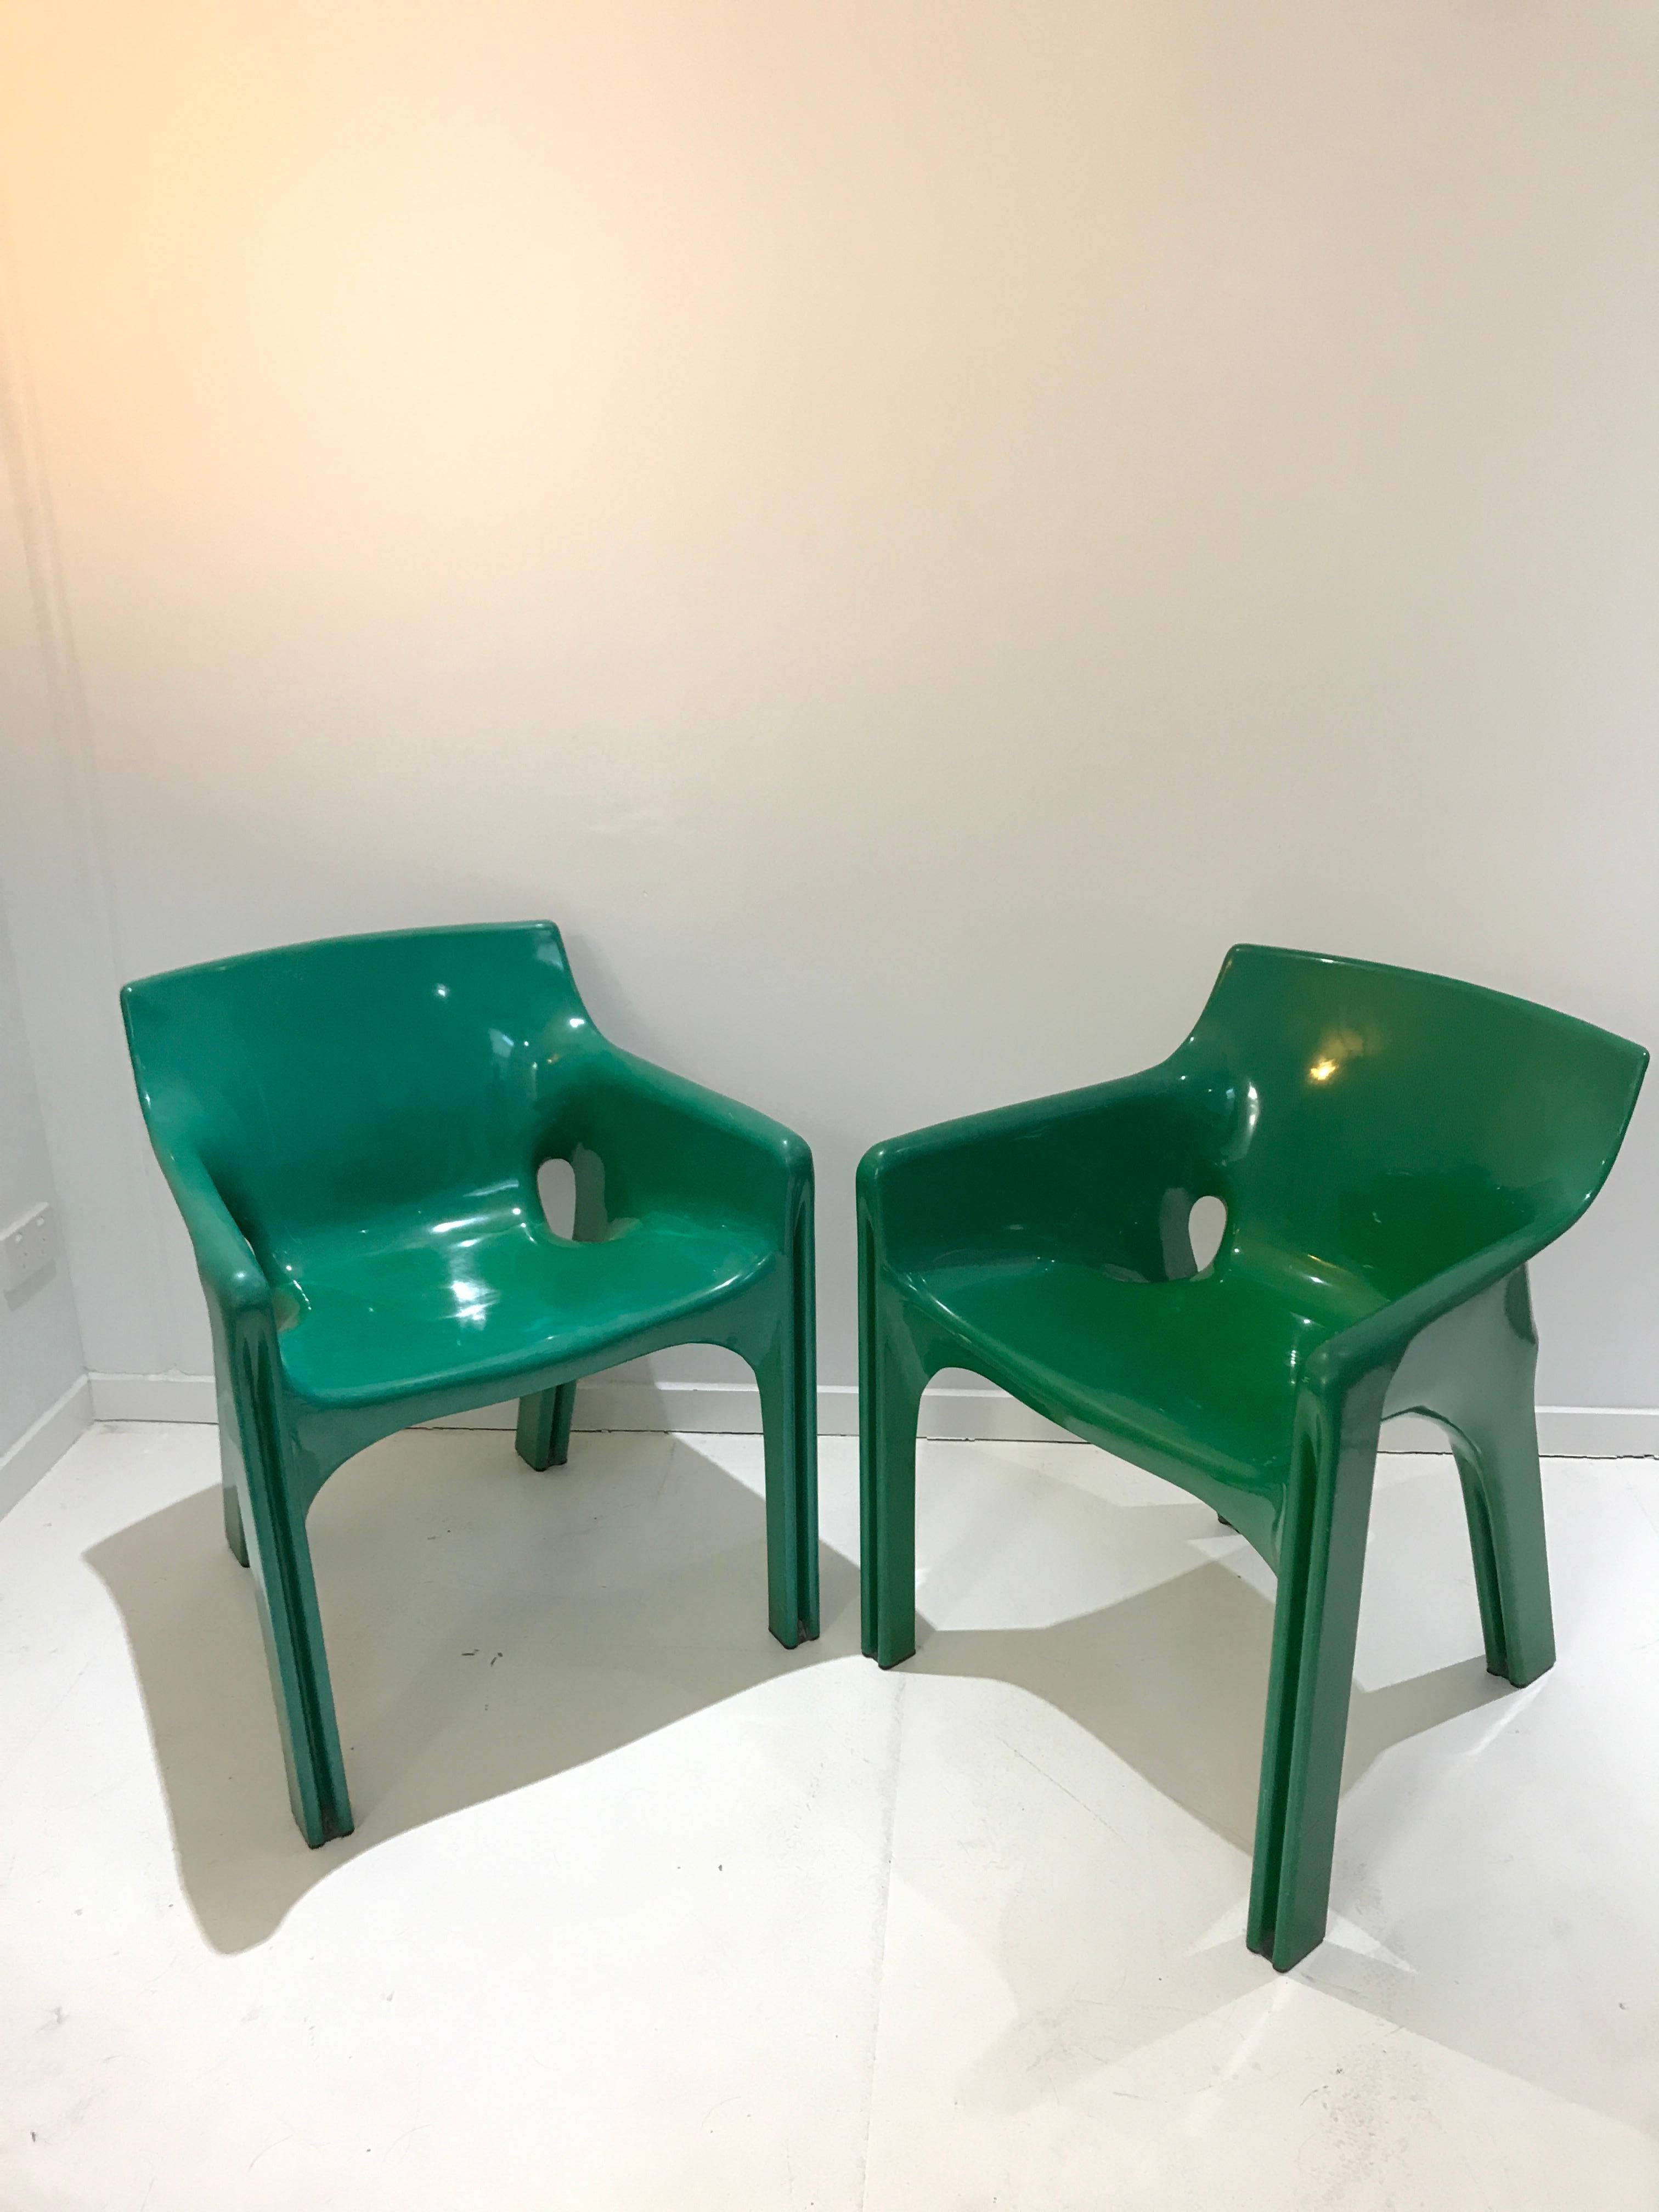 Italian Mid-Century Modern Gaudi Chairs by Vico Magistretti for Artemide, 1970s 6